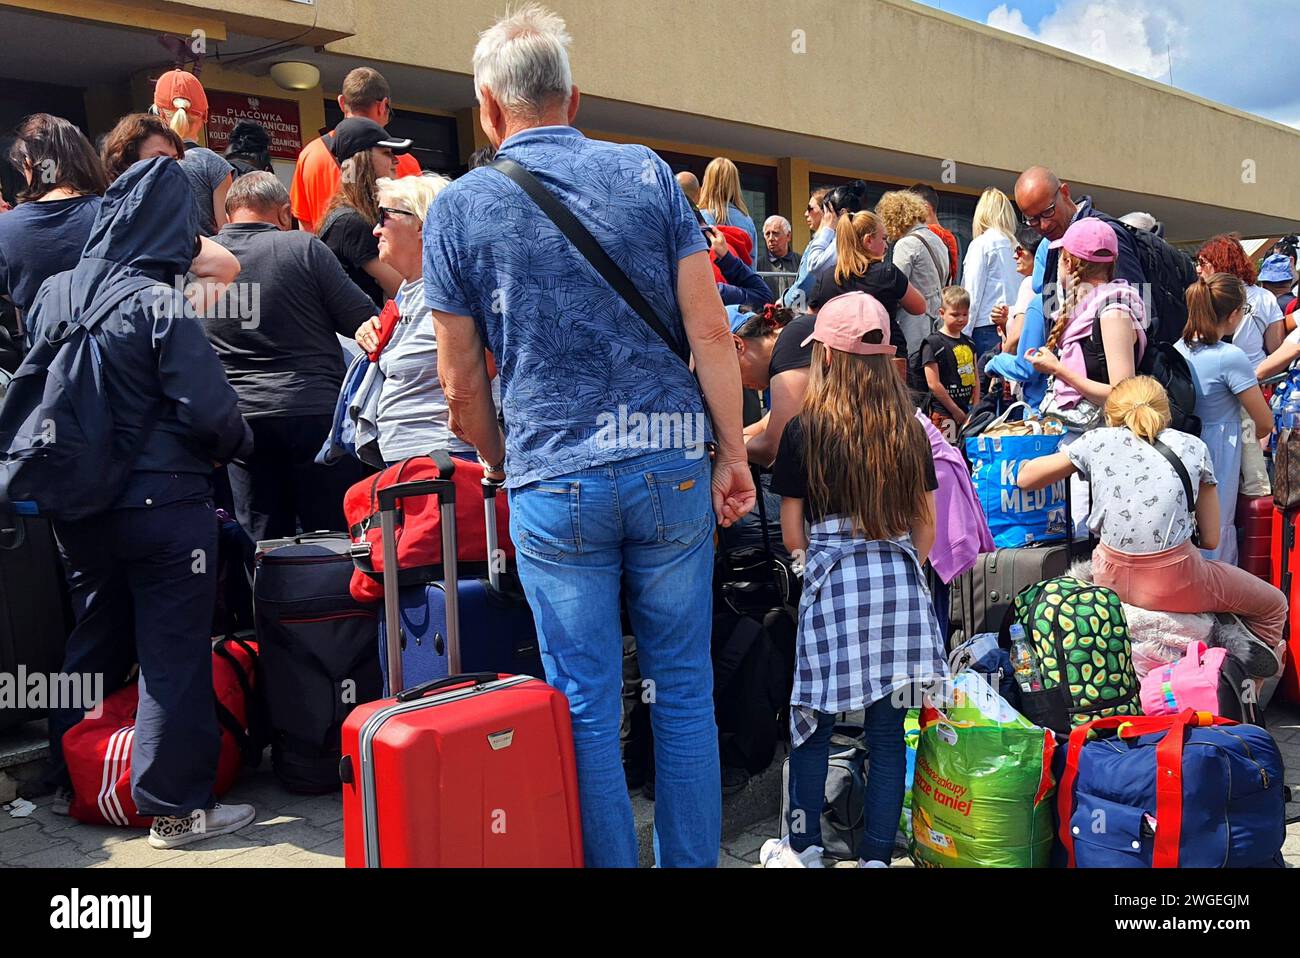 People are standing on platform, passengers with suitcases and bags. Ukrainian refugees wait for train in Polish city of Przemysl, Poland 2022-06-17 Stock Photo